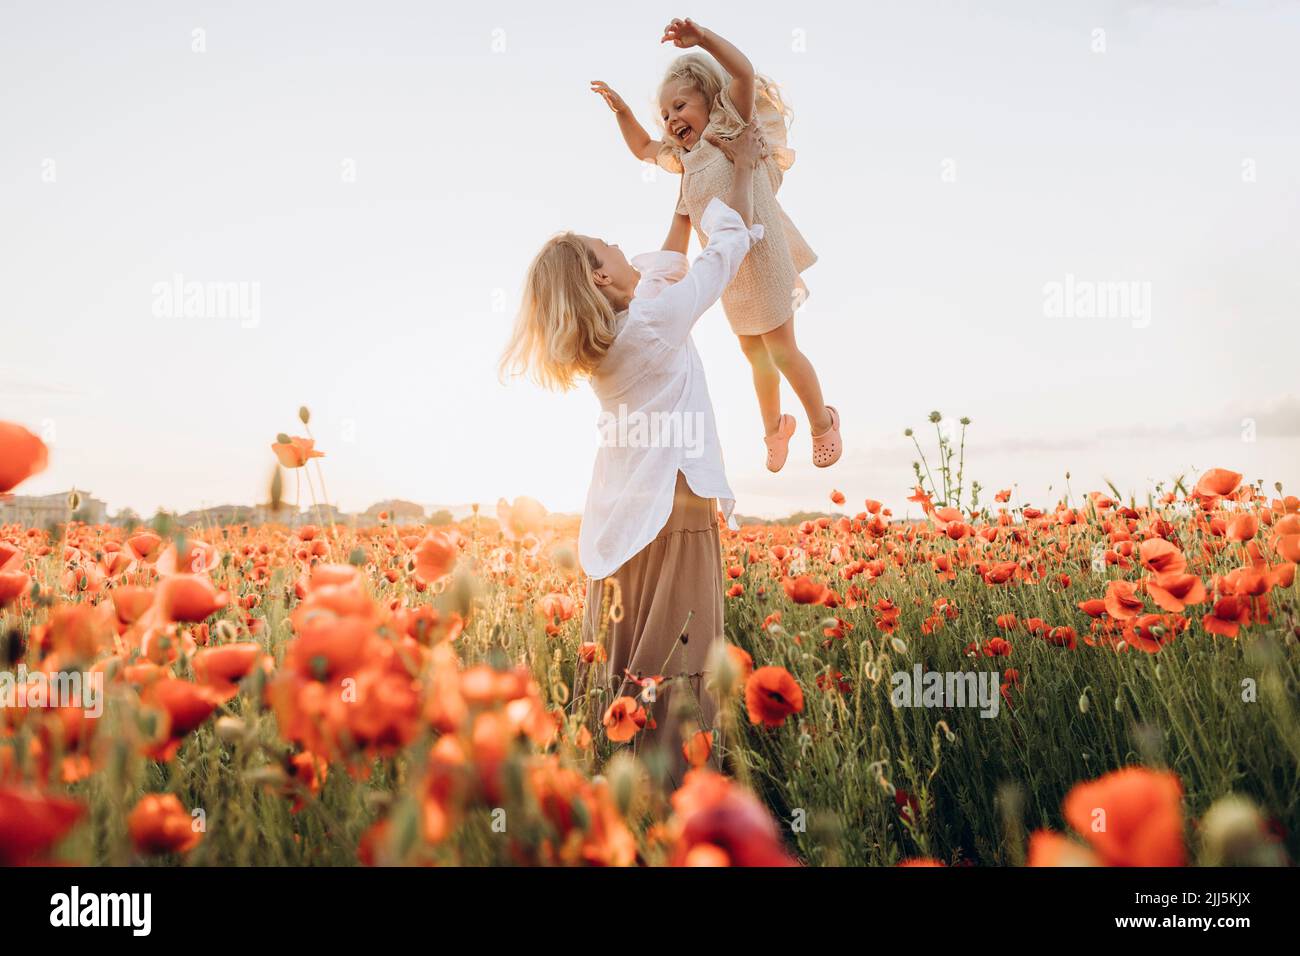 Playful mother lifting daughter in air on sunny day Stock Photo